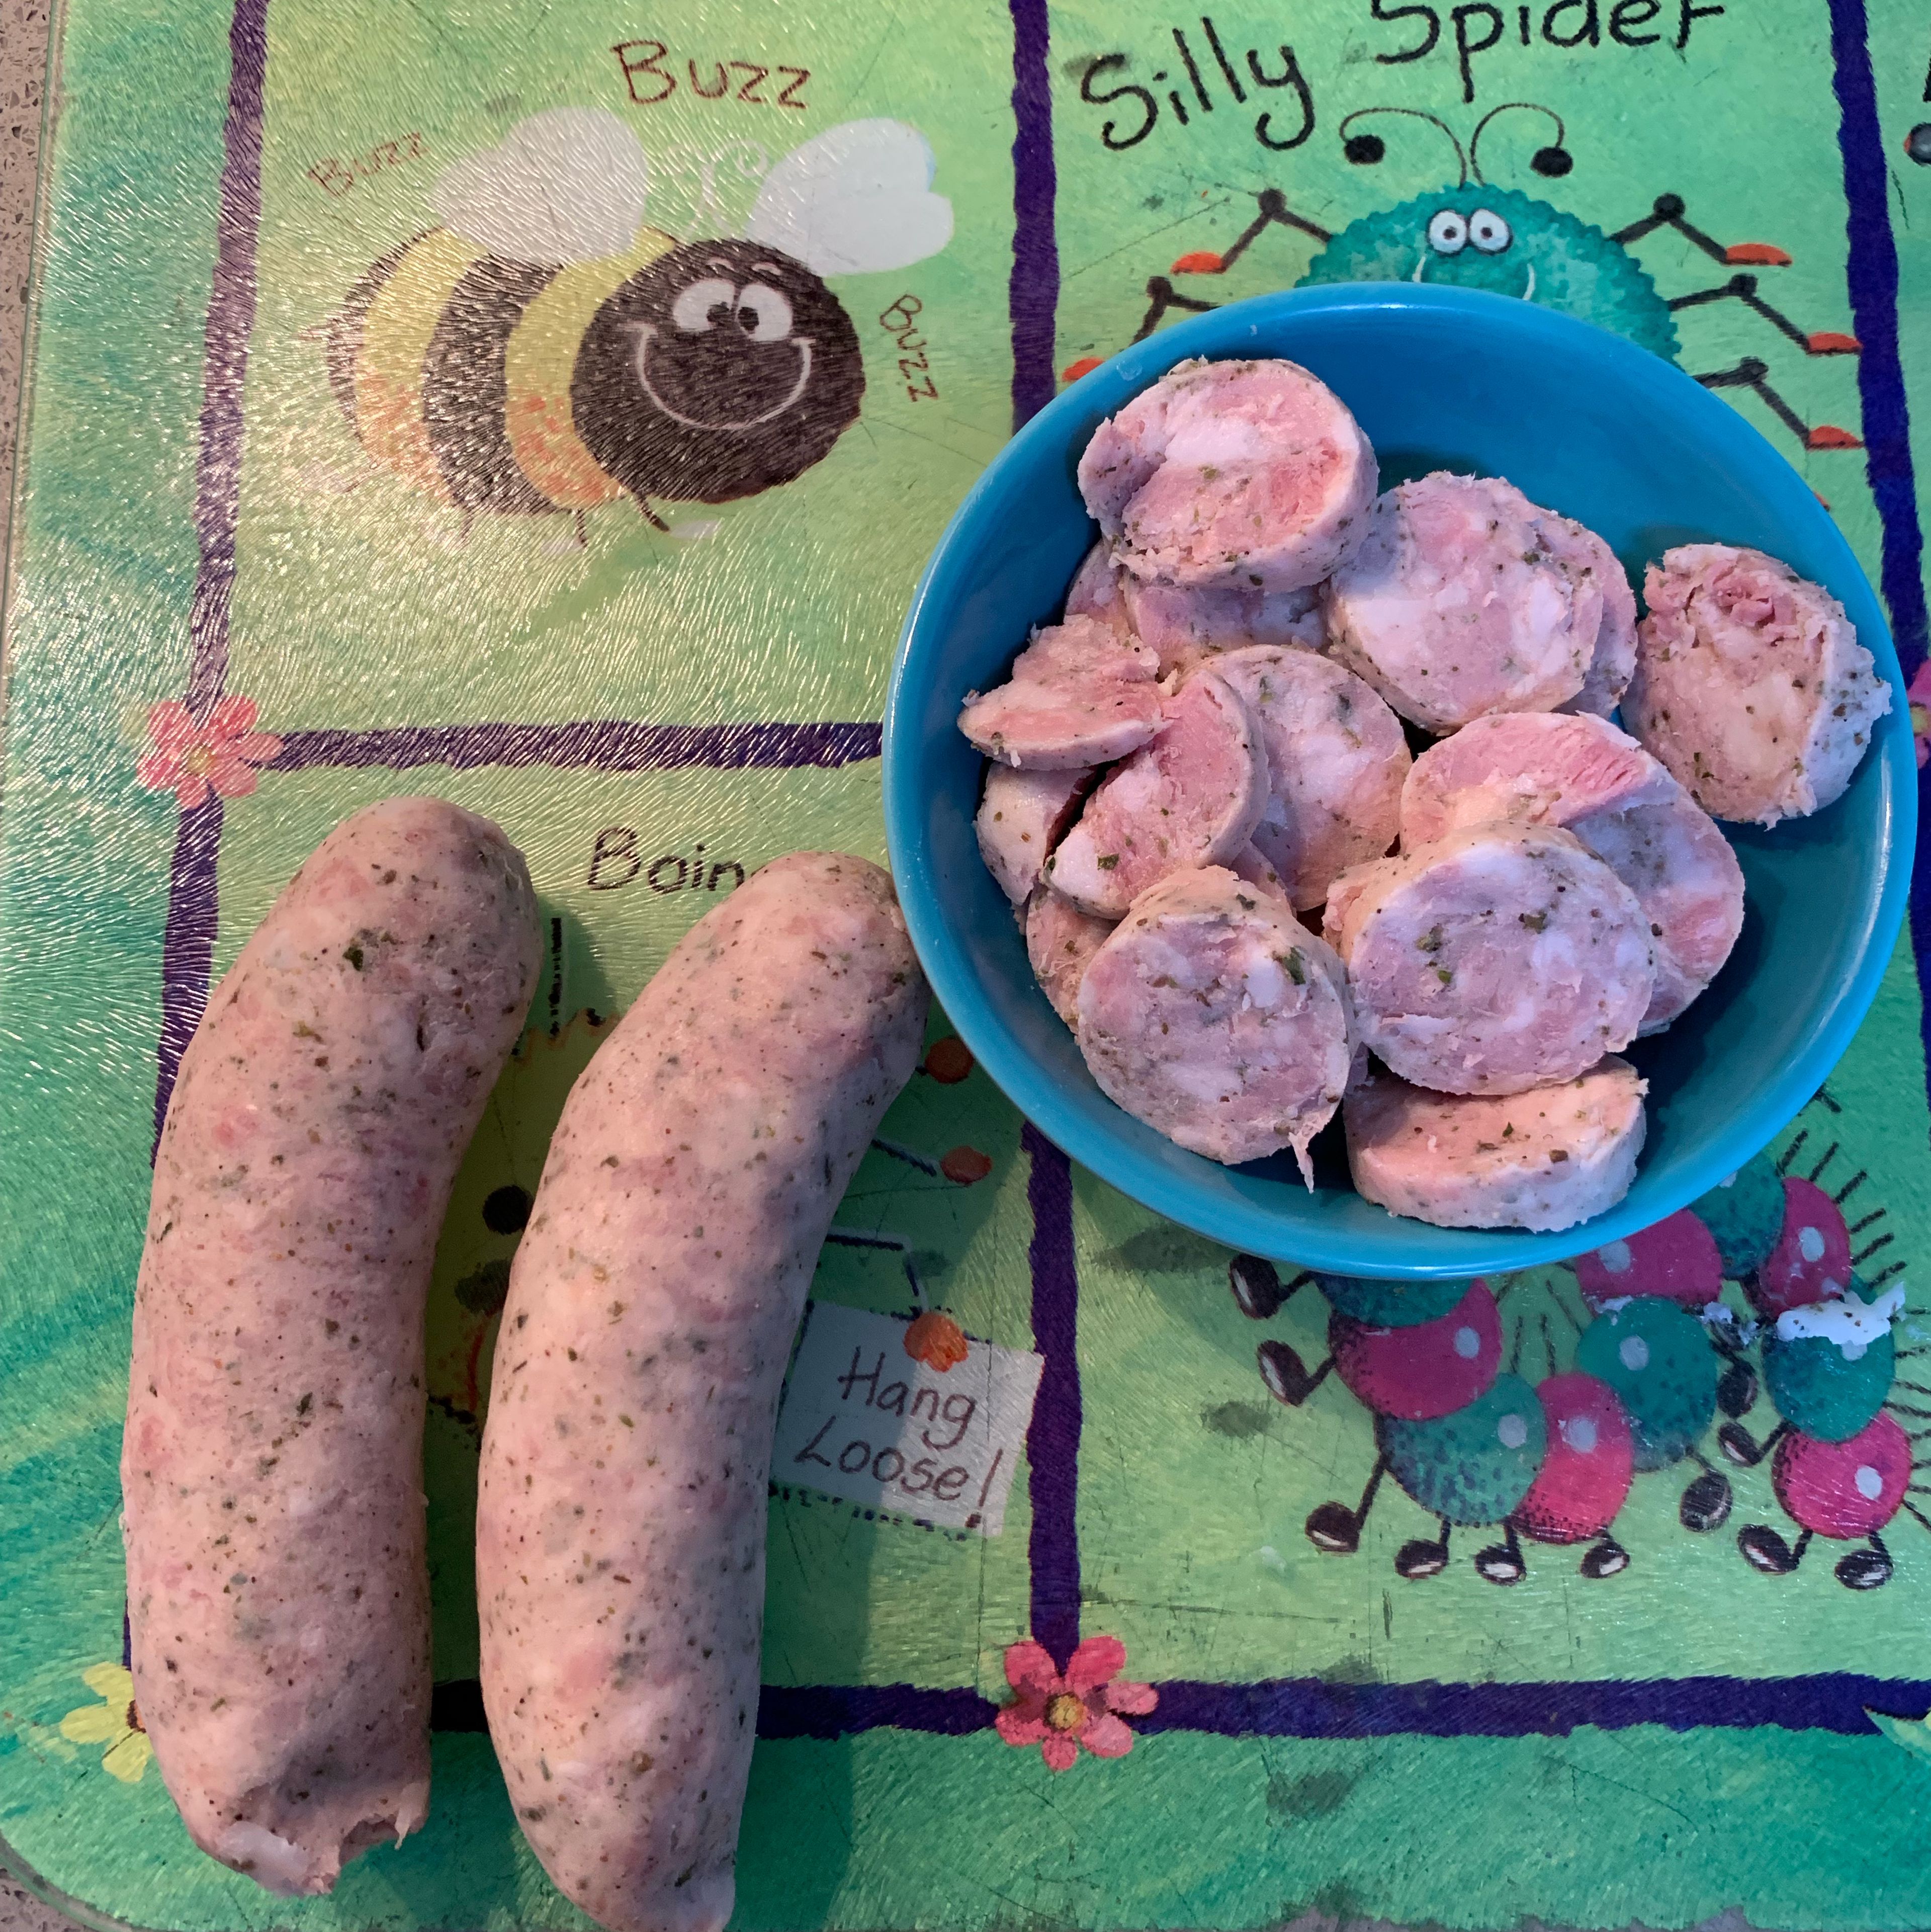 Prepare the white pork sausages (you can use as many or as little as you like) by cutting them in pieces and adding them to the soup. They can also be changed for normal sausages or ham. Keep on cooking for another 5-8 minutes till hot.